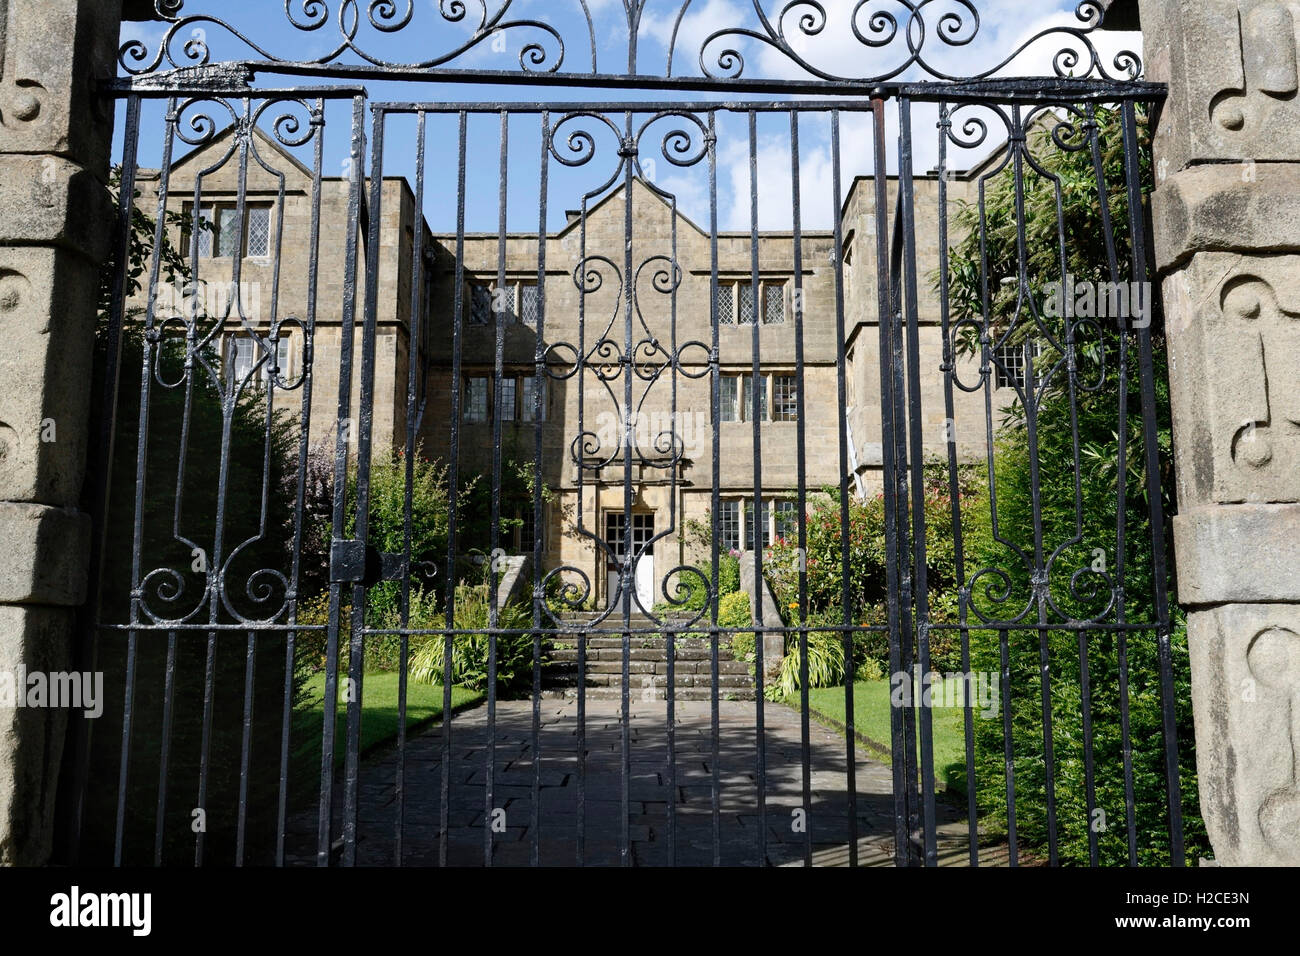 Outside Eyam Hall Derbyshire Peak District National Park England UK, Jacobian architecture, historic manor house, listed building, closed metal gate Stock Photo